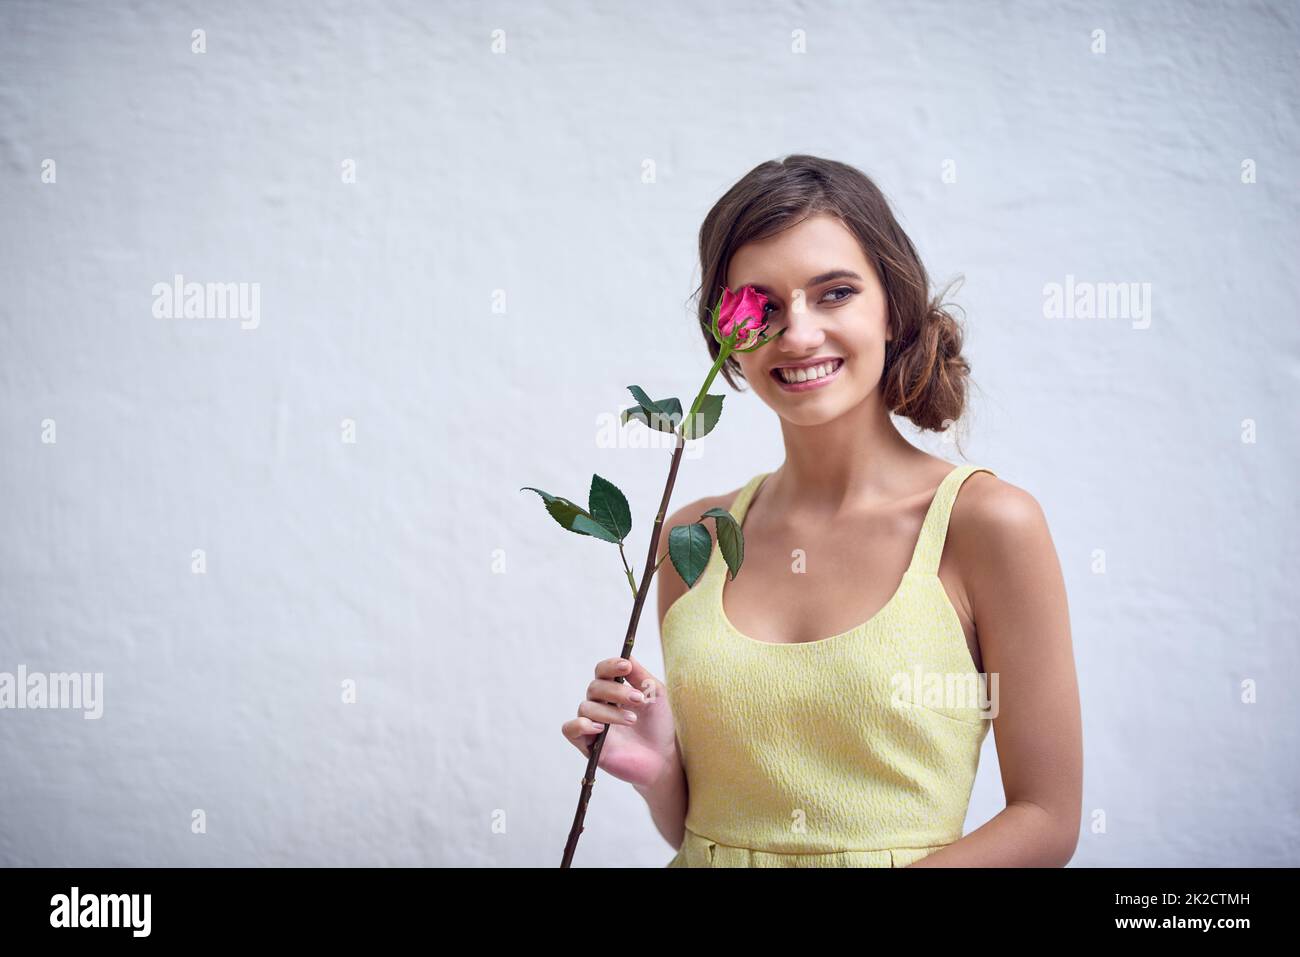 Shes a flower type of girl. Studio shot of a cheerful young woman holding a pink rose next to her face while standing against a grey background. Stock Photo